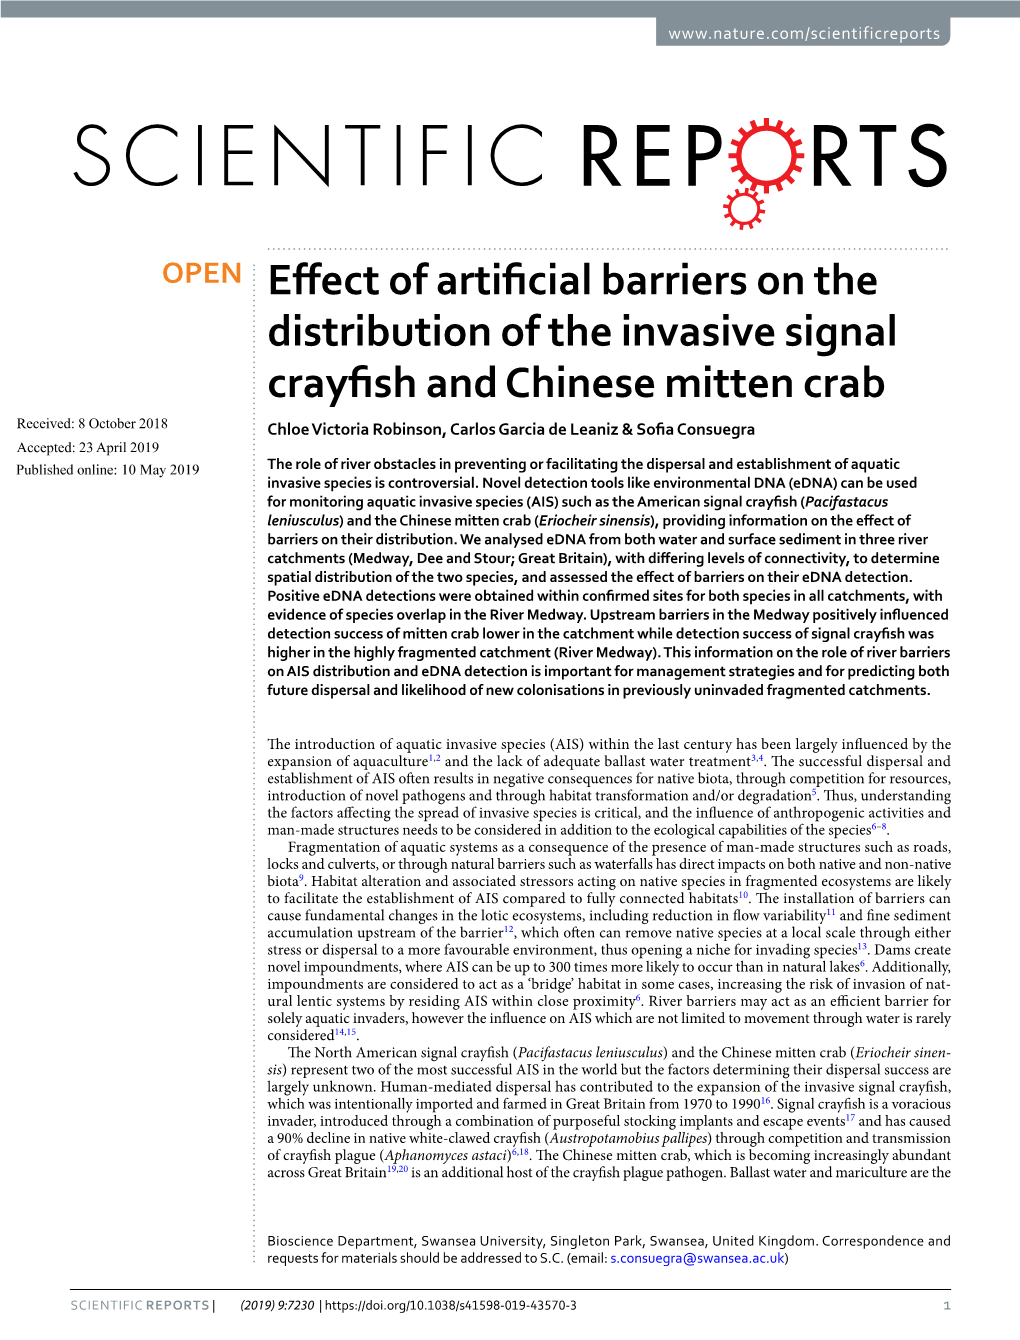 Effect of Artificial Barriers on the Distribution of the Invasive Signal